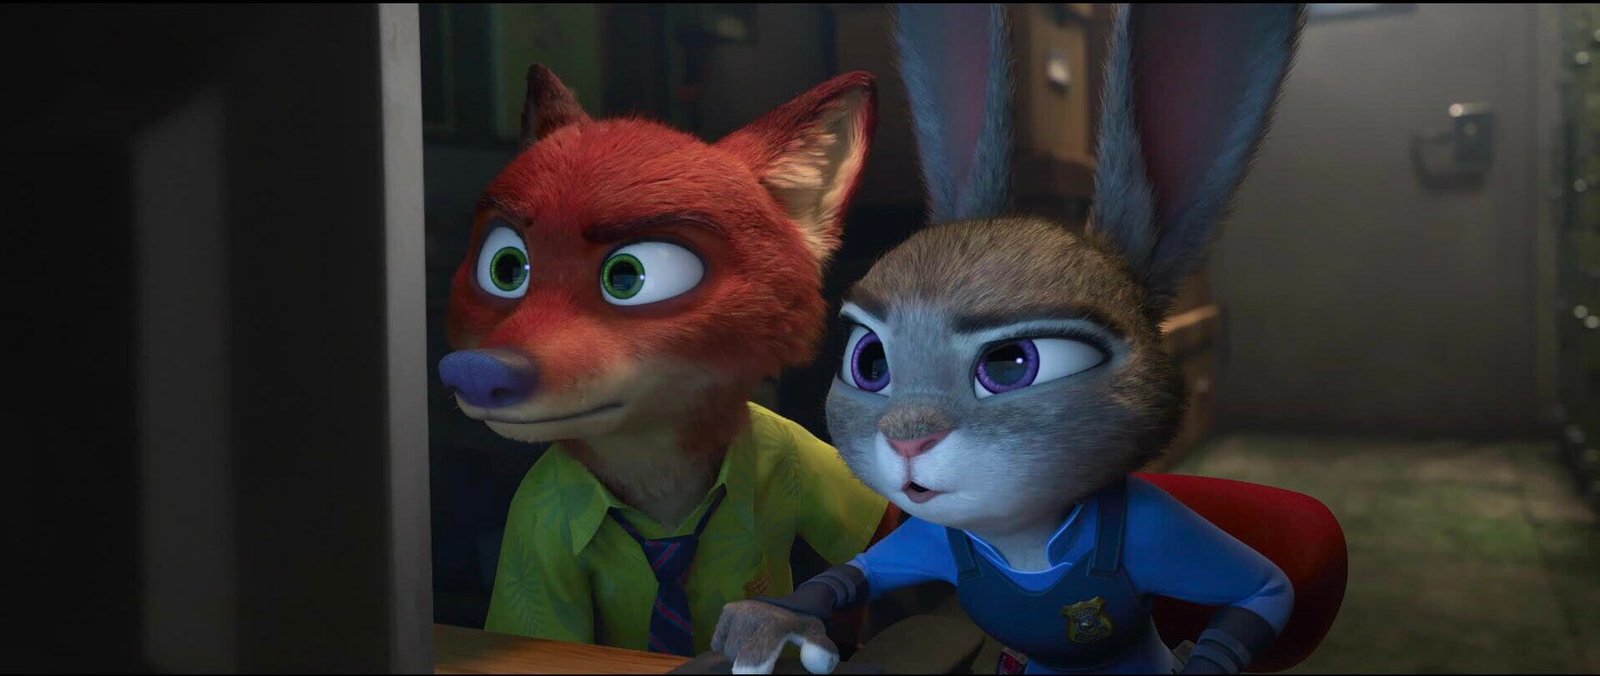 Zootopia 2: Release Date, Cast, Plot, Trailer & Everything We Know So Far